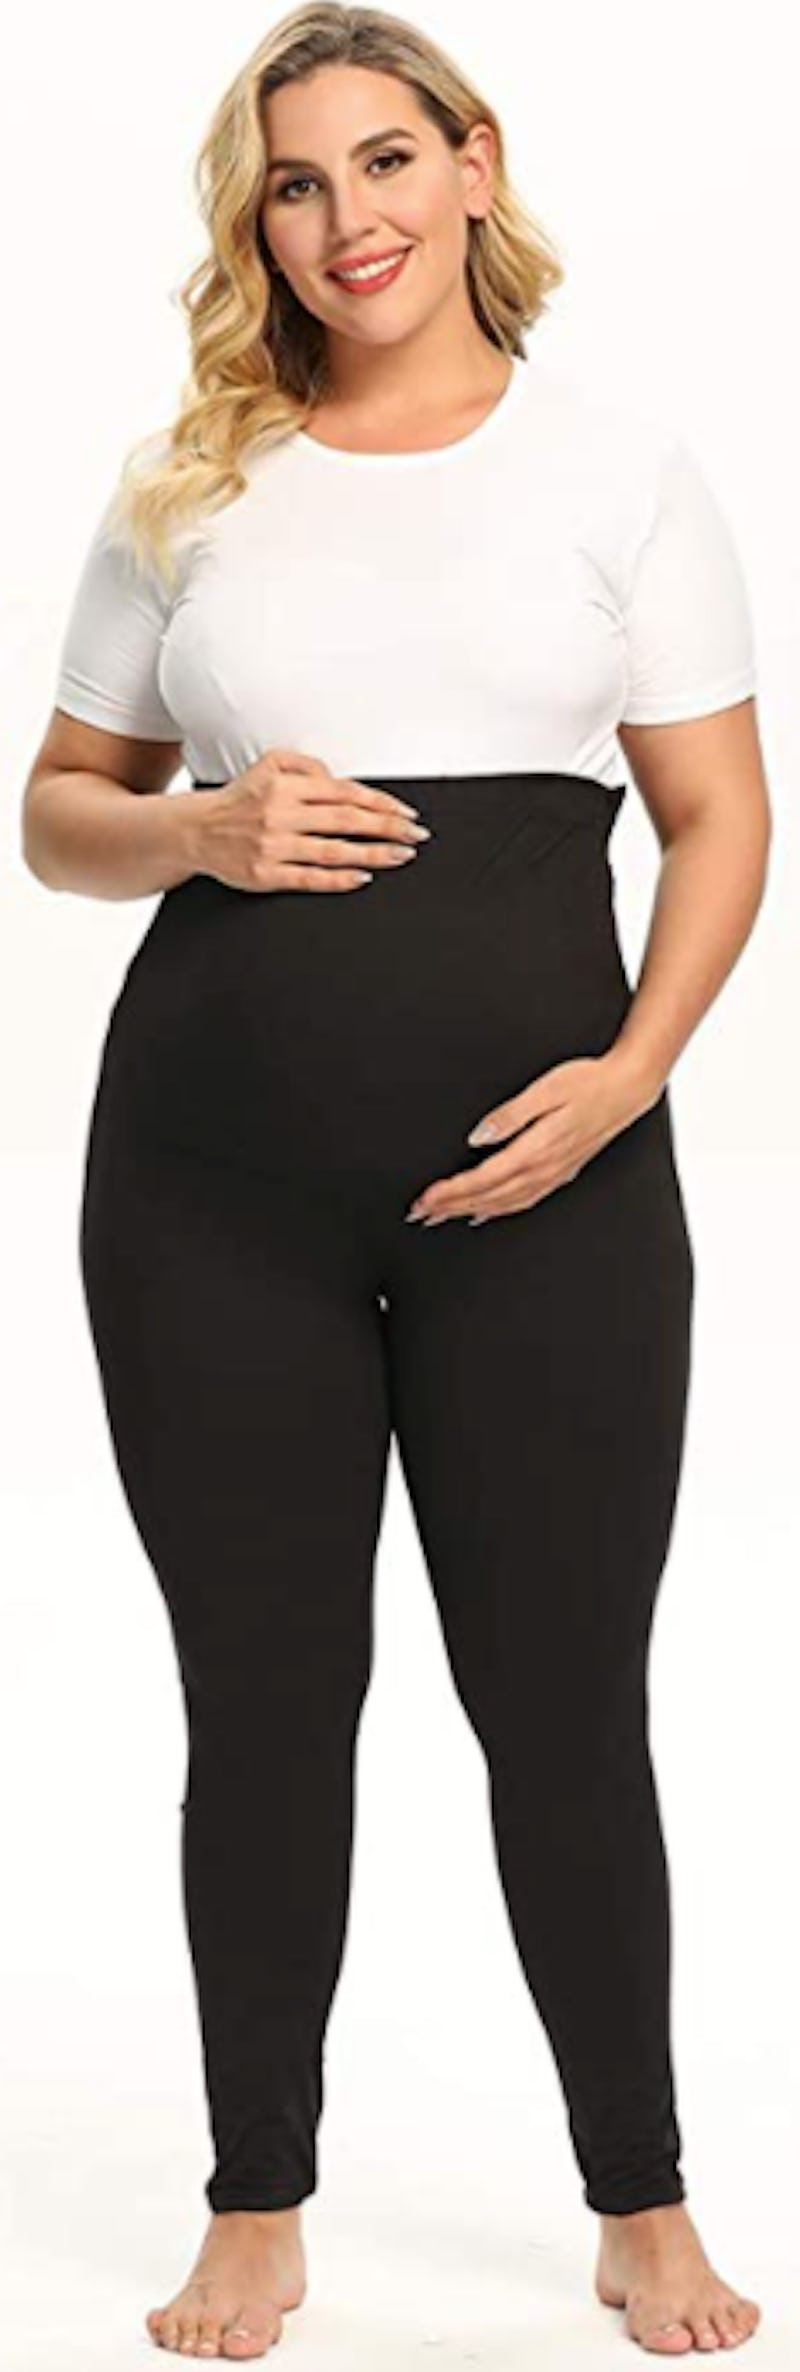 The 6 Best Maternity Workout Leggings